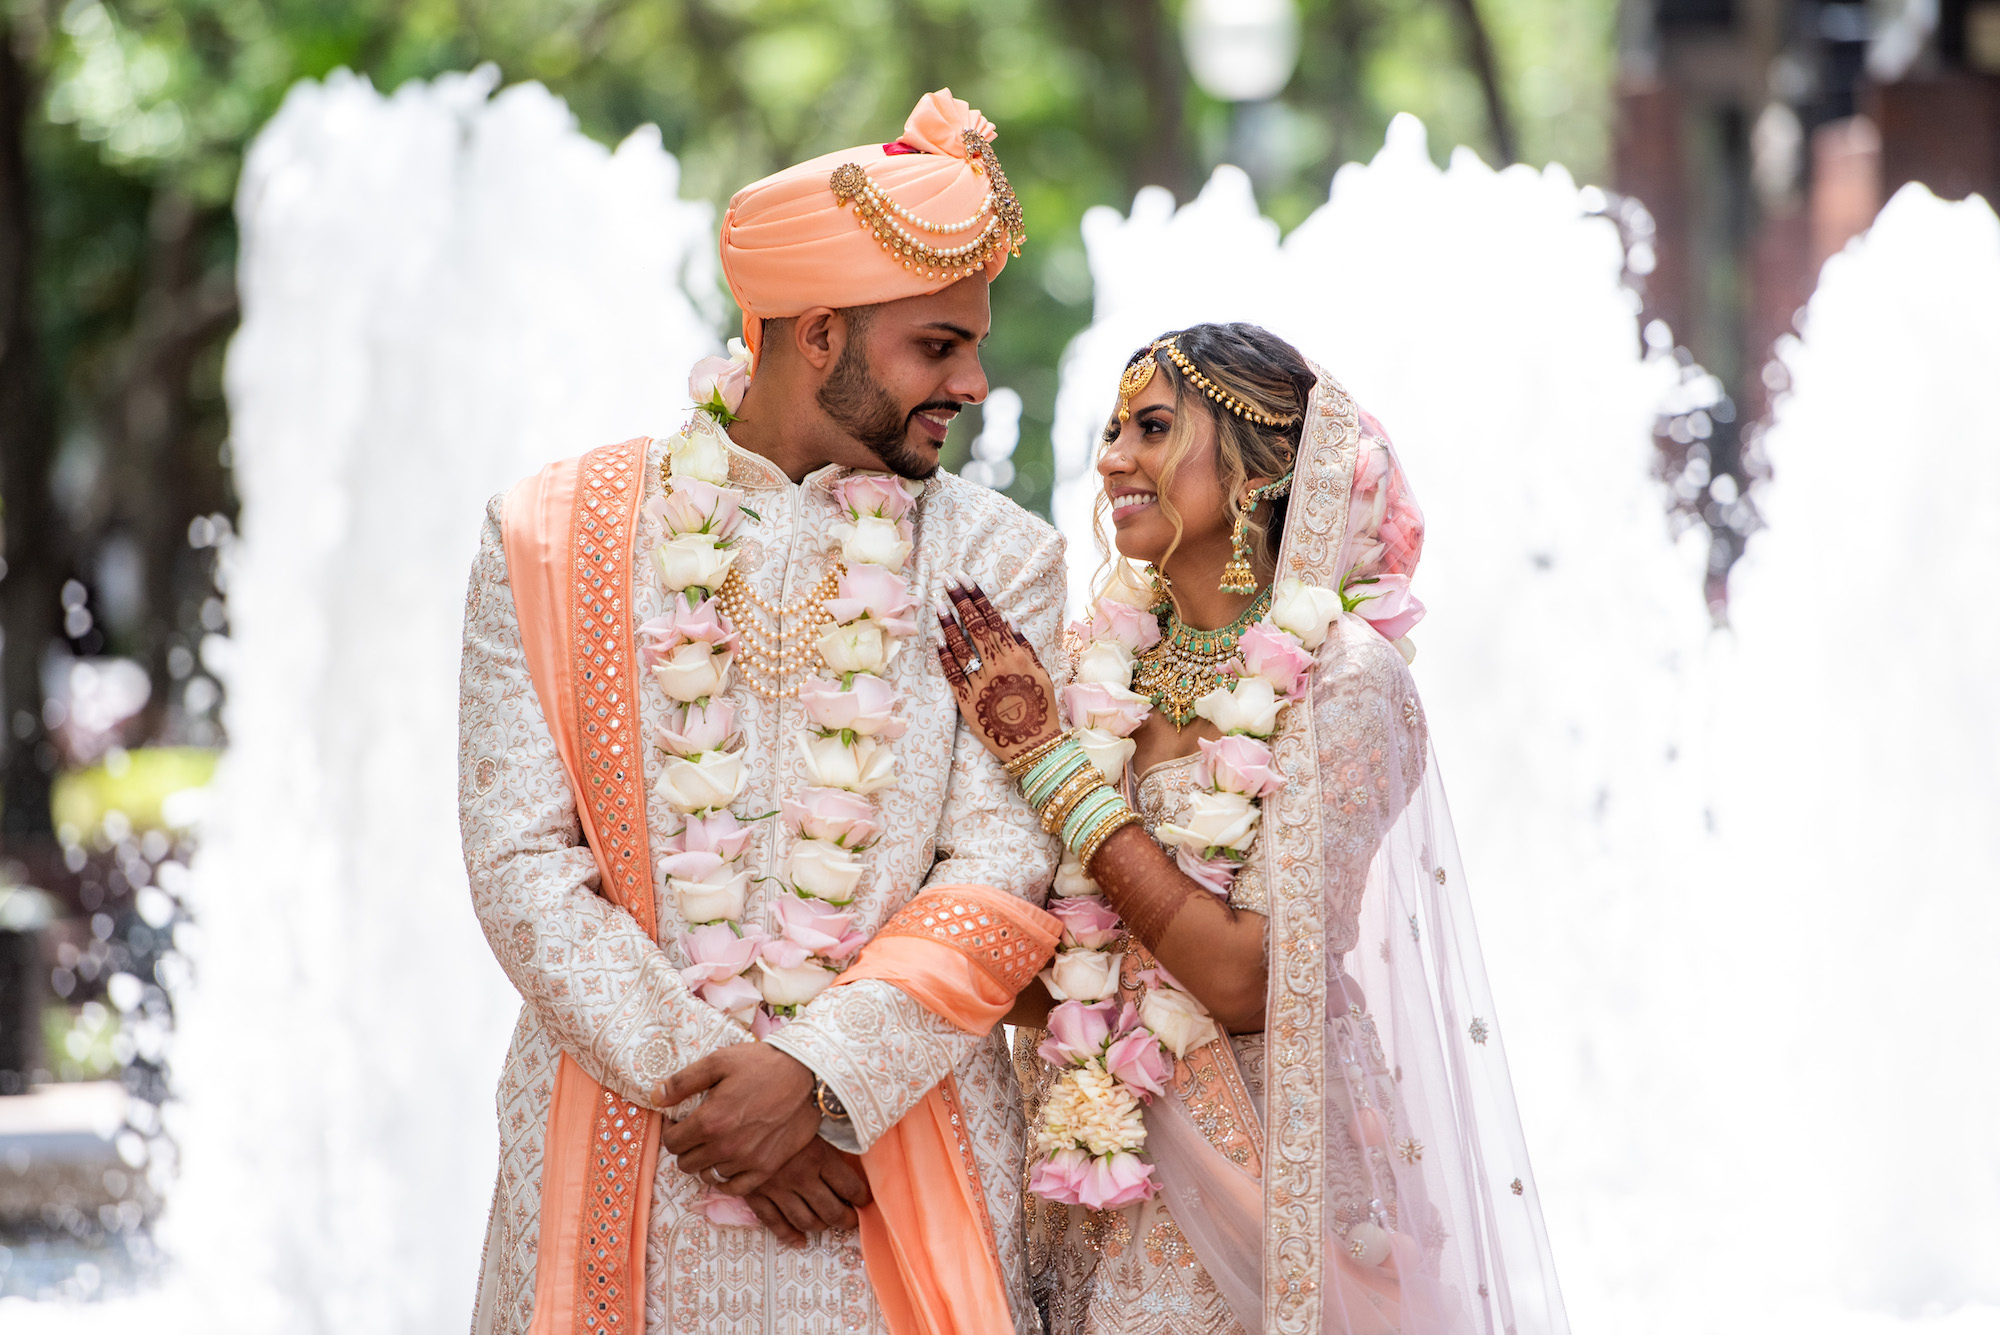 Florida Bride and Groom Kissing, Wearing Traditional Indian Wedding Mala, Ivory and Pink rose flower garland, Rose Gold and White Saree, Coral Peach Turban | Tampa Bay Wedding Venue Hilton Downtown Tampa | Michele Renee the Studio